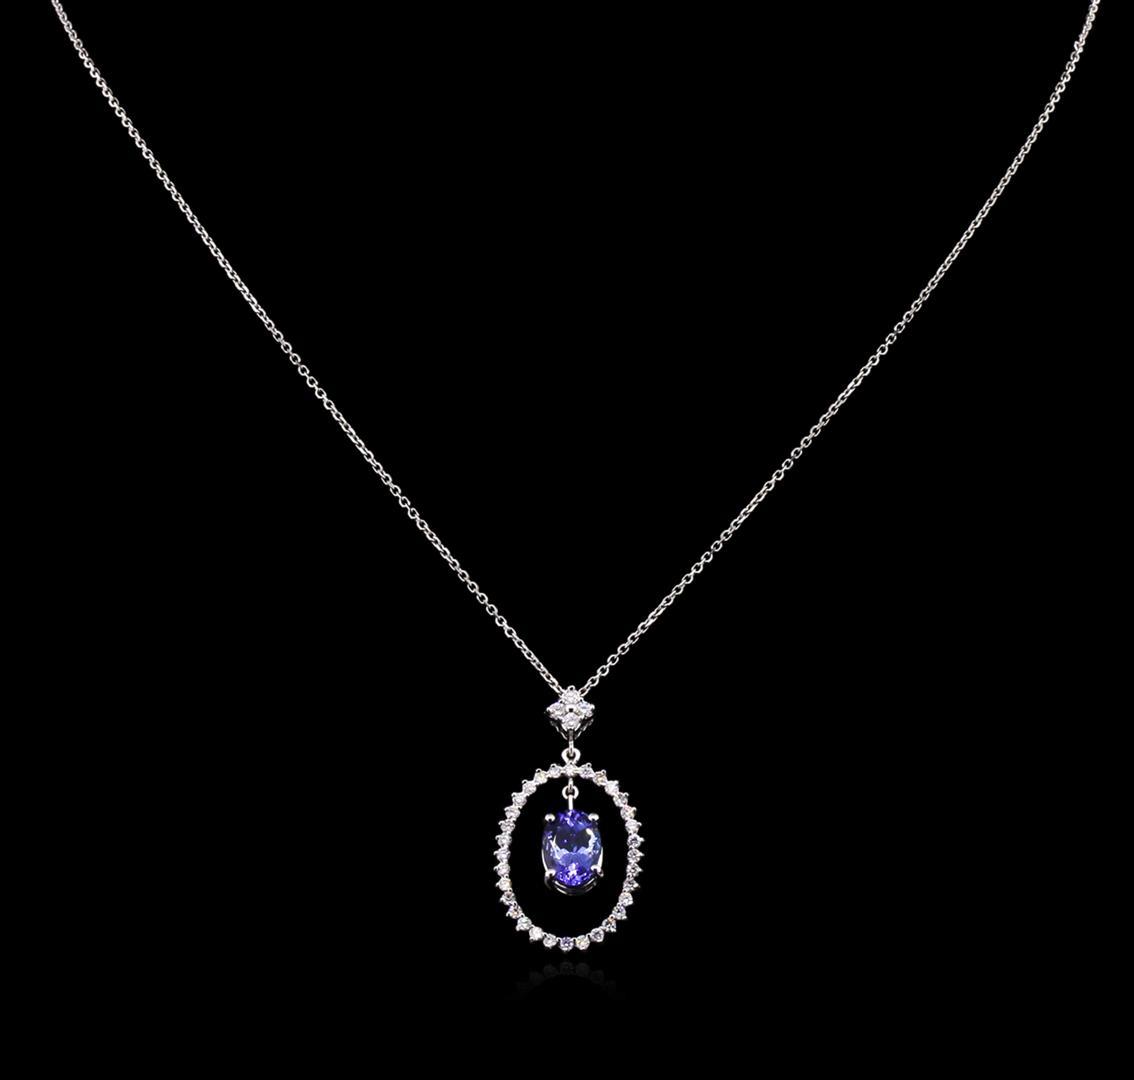 2.00 ctw Tanzanite and Diamond Pendant With Chain - 14KT White Gold